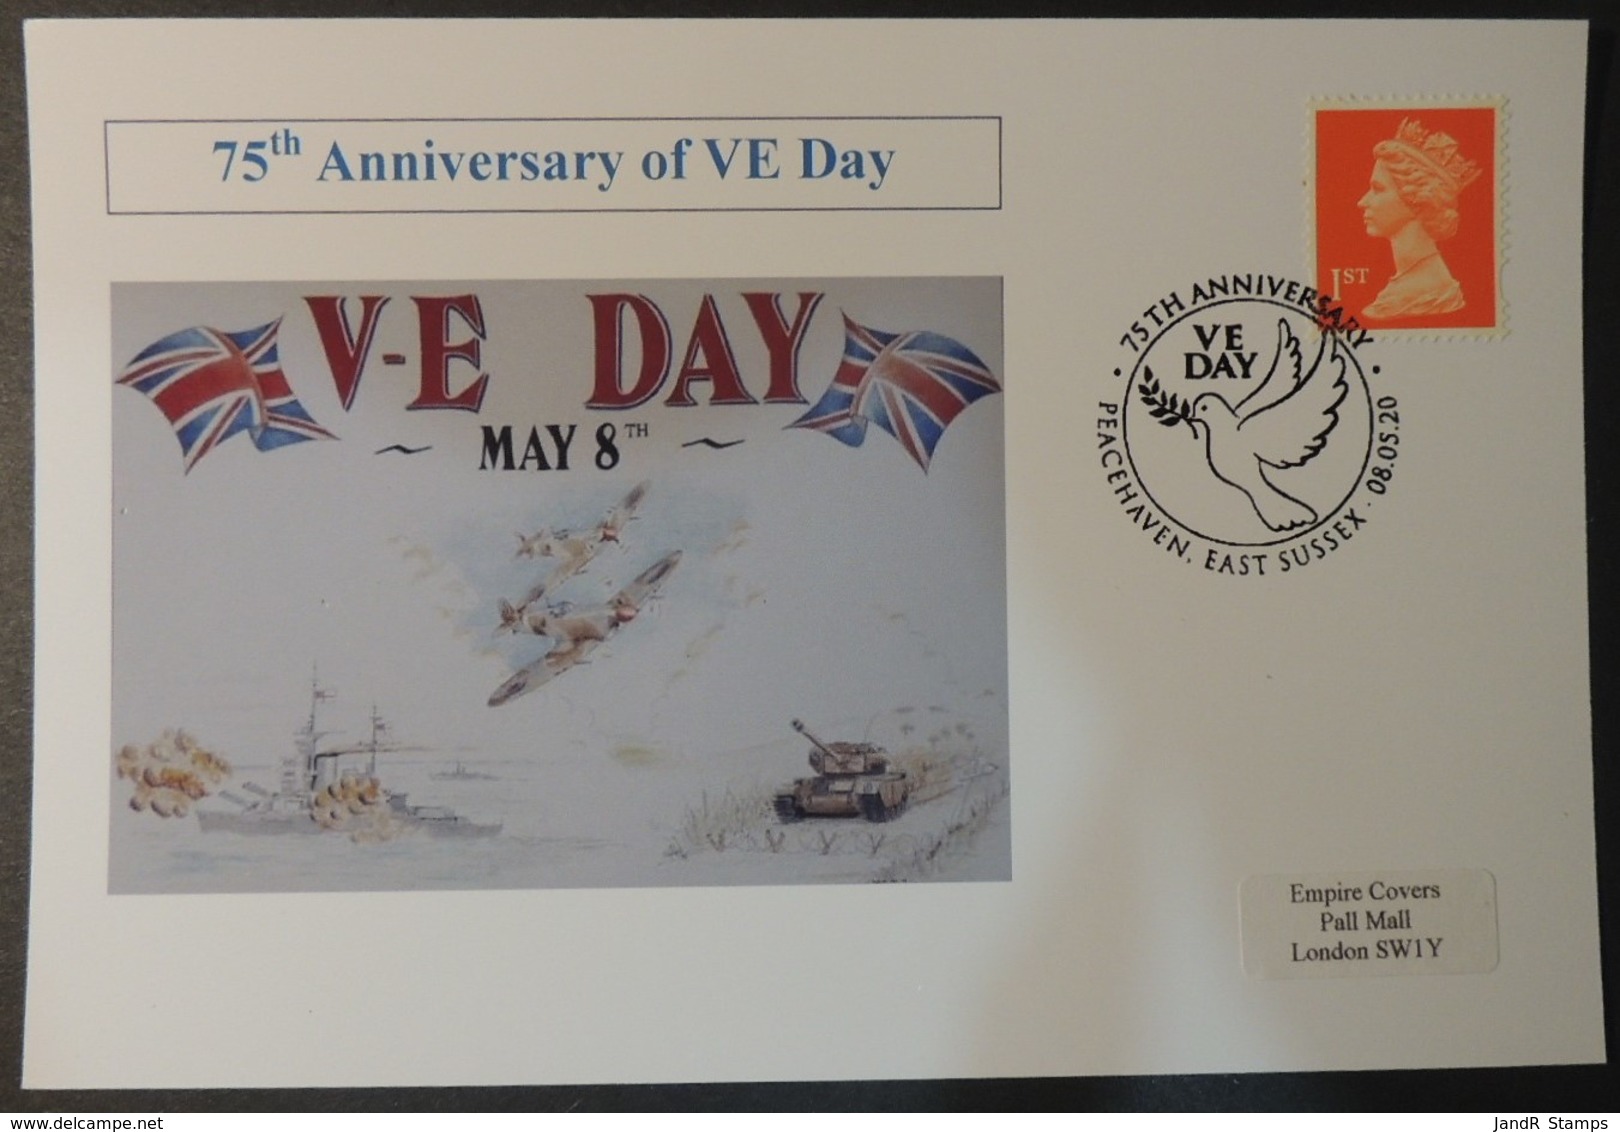 GB FDC VE Day 75th Anniversary - Postal Card With Peacehaven Cancel Ww2 Wwii - 2011-2020 Decimal Issues